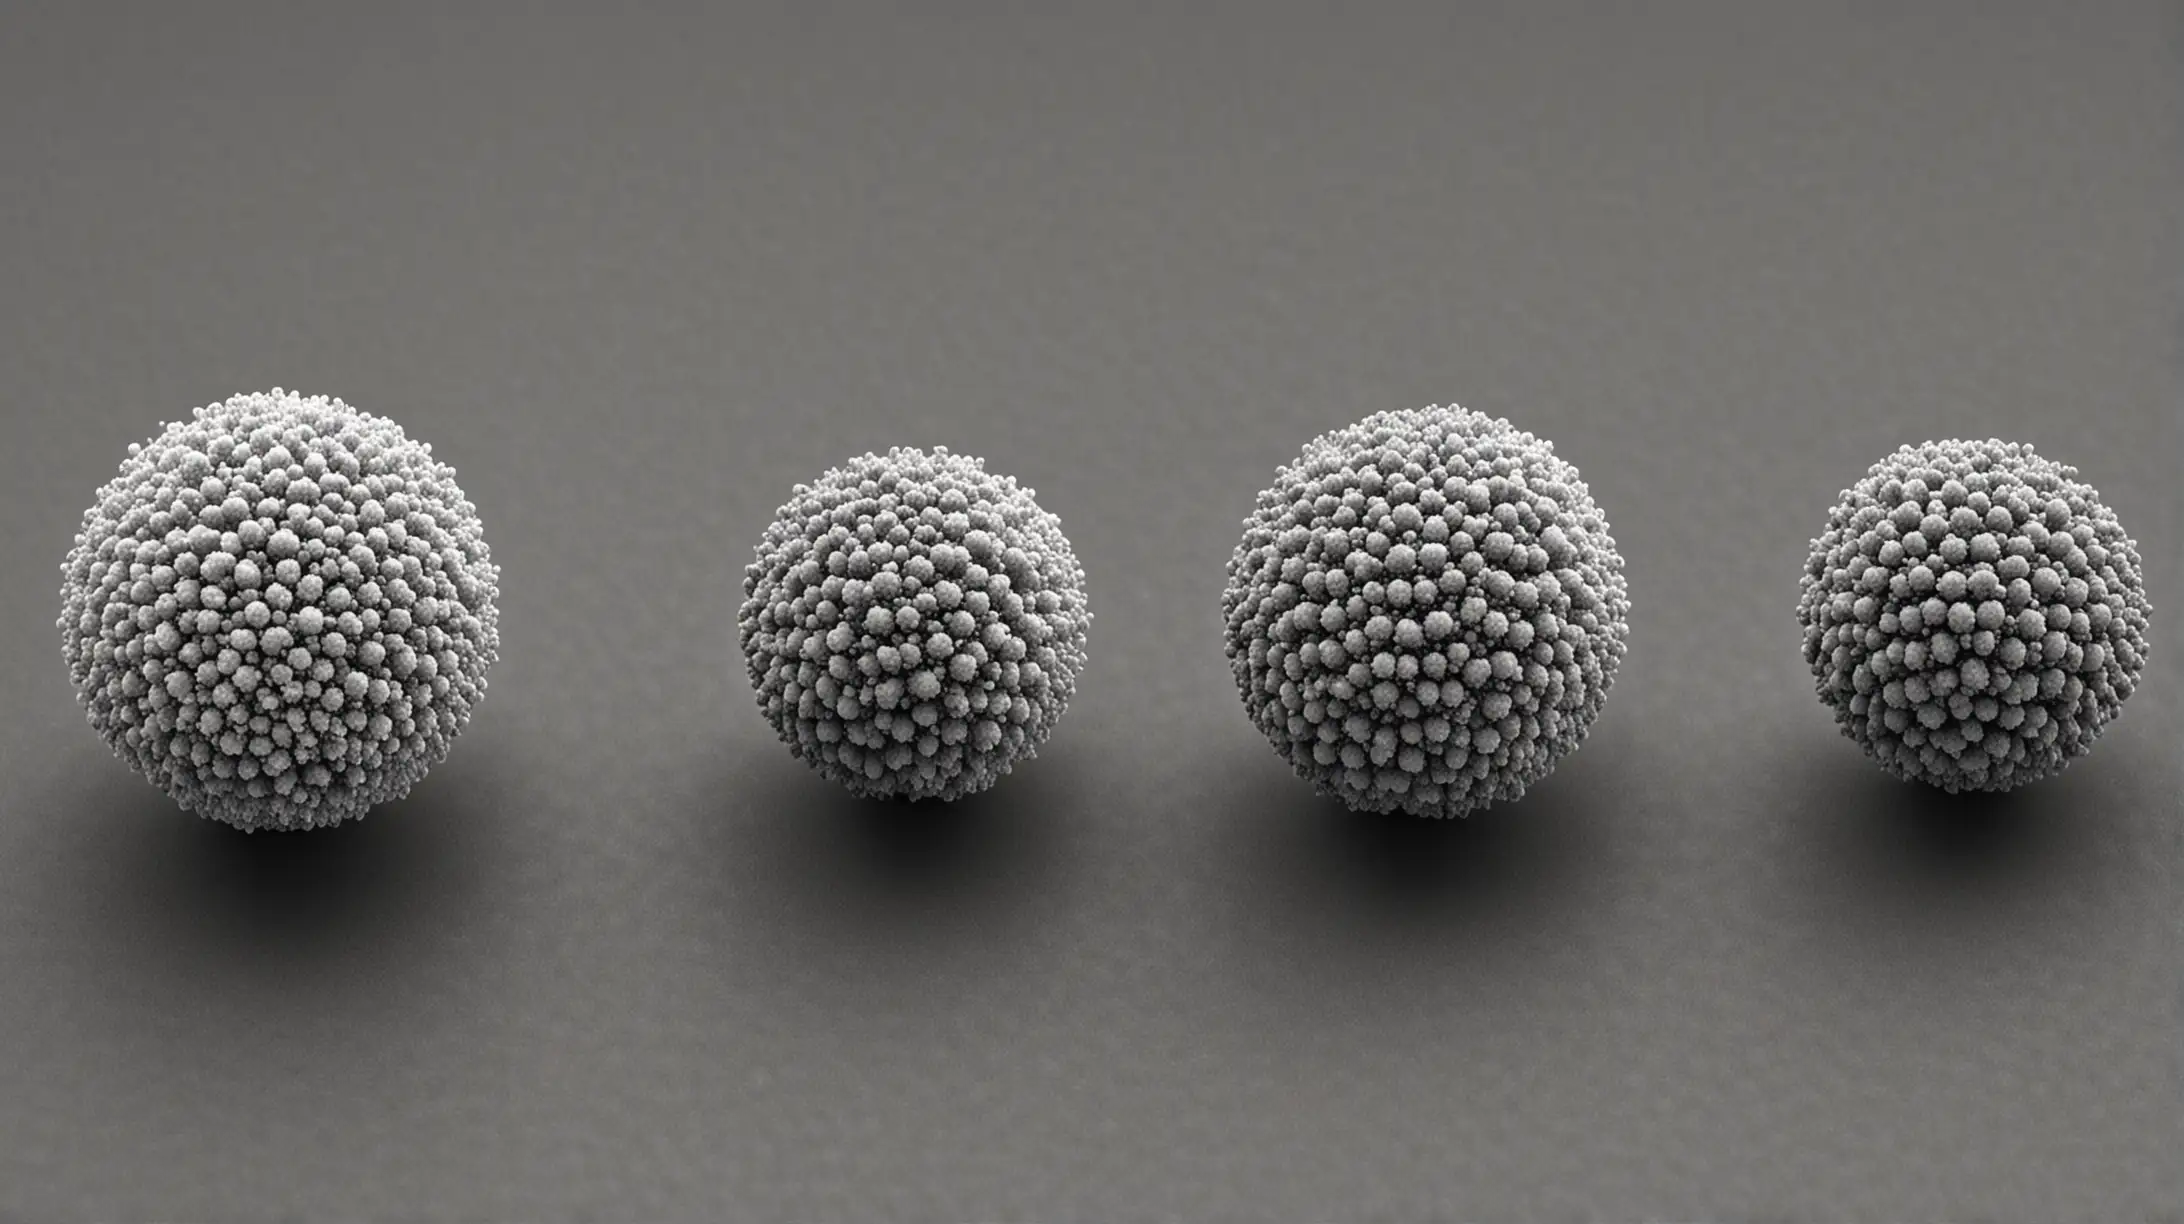 4 round nanoparticles in different sizes